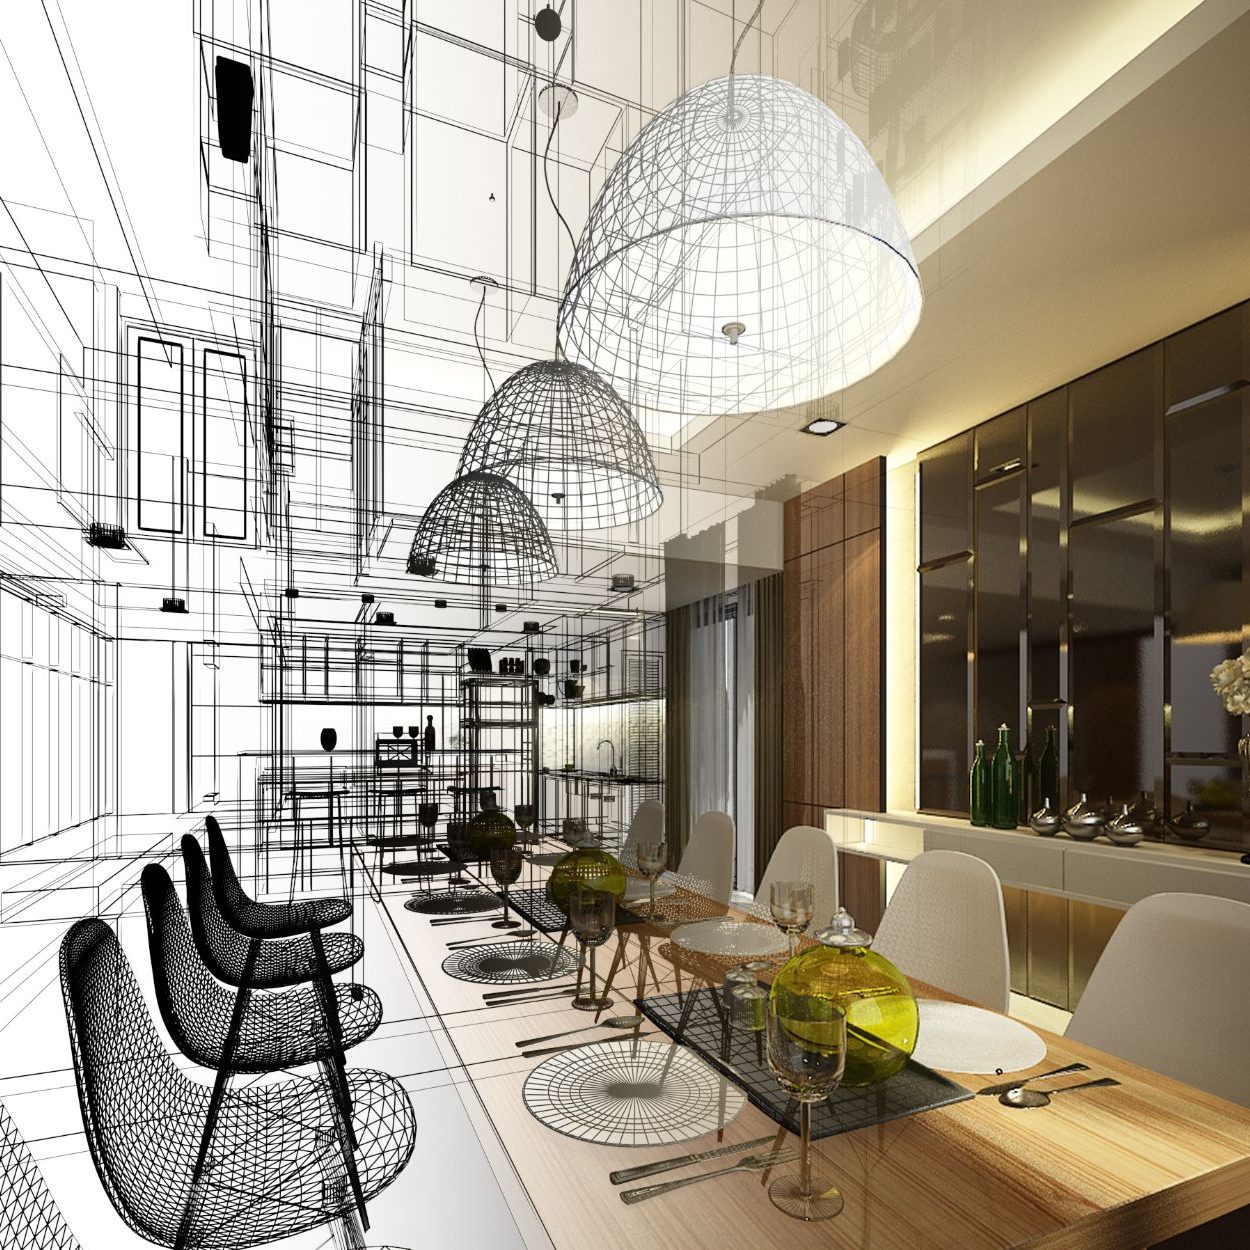 Abstract Sketch Design Of Interior Dining, 3d Render